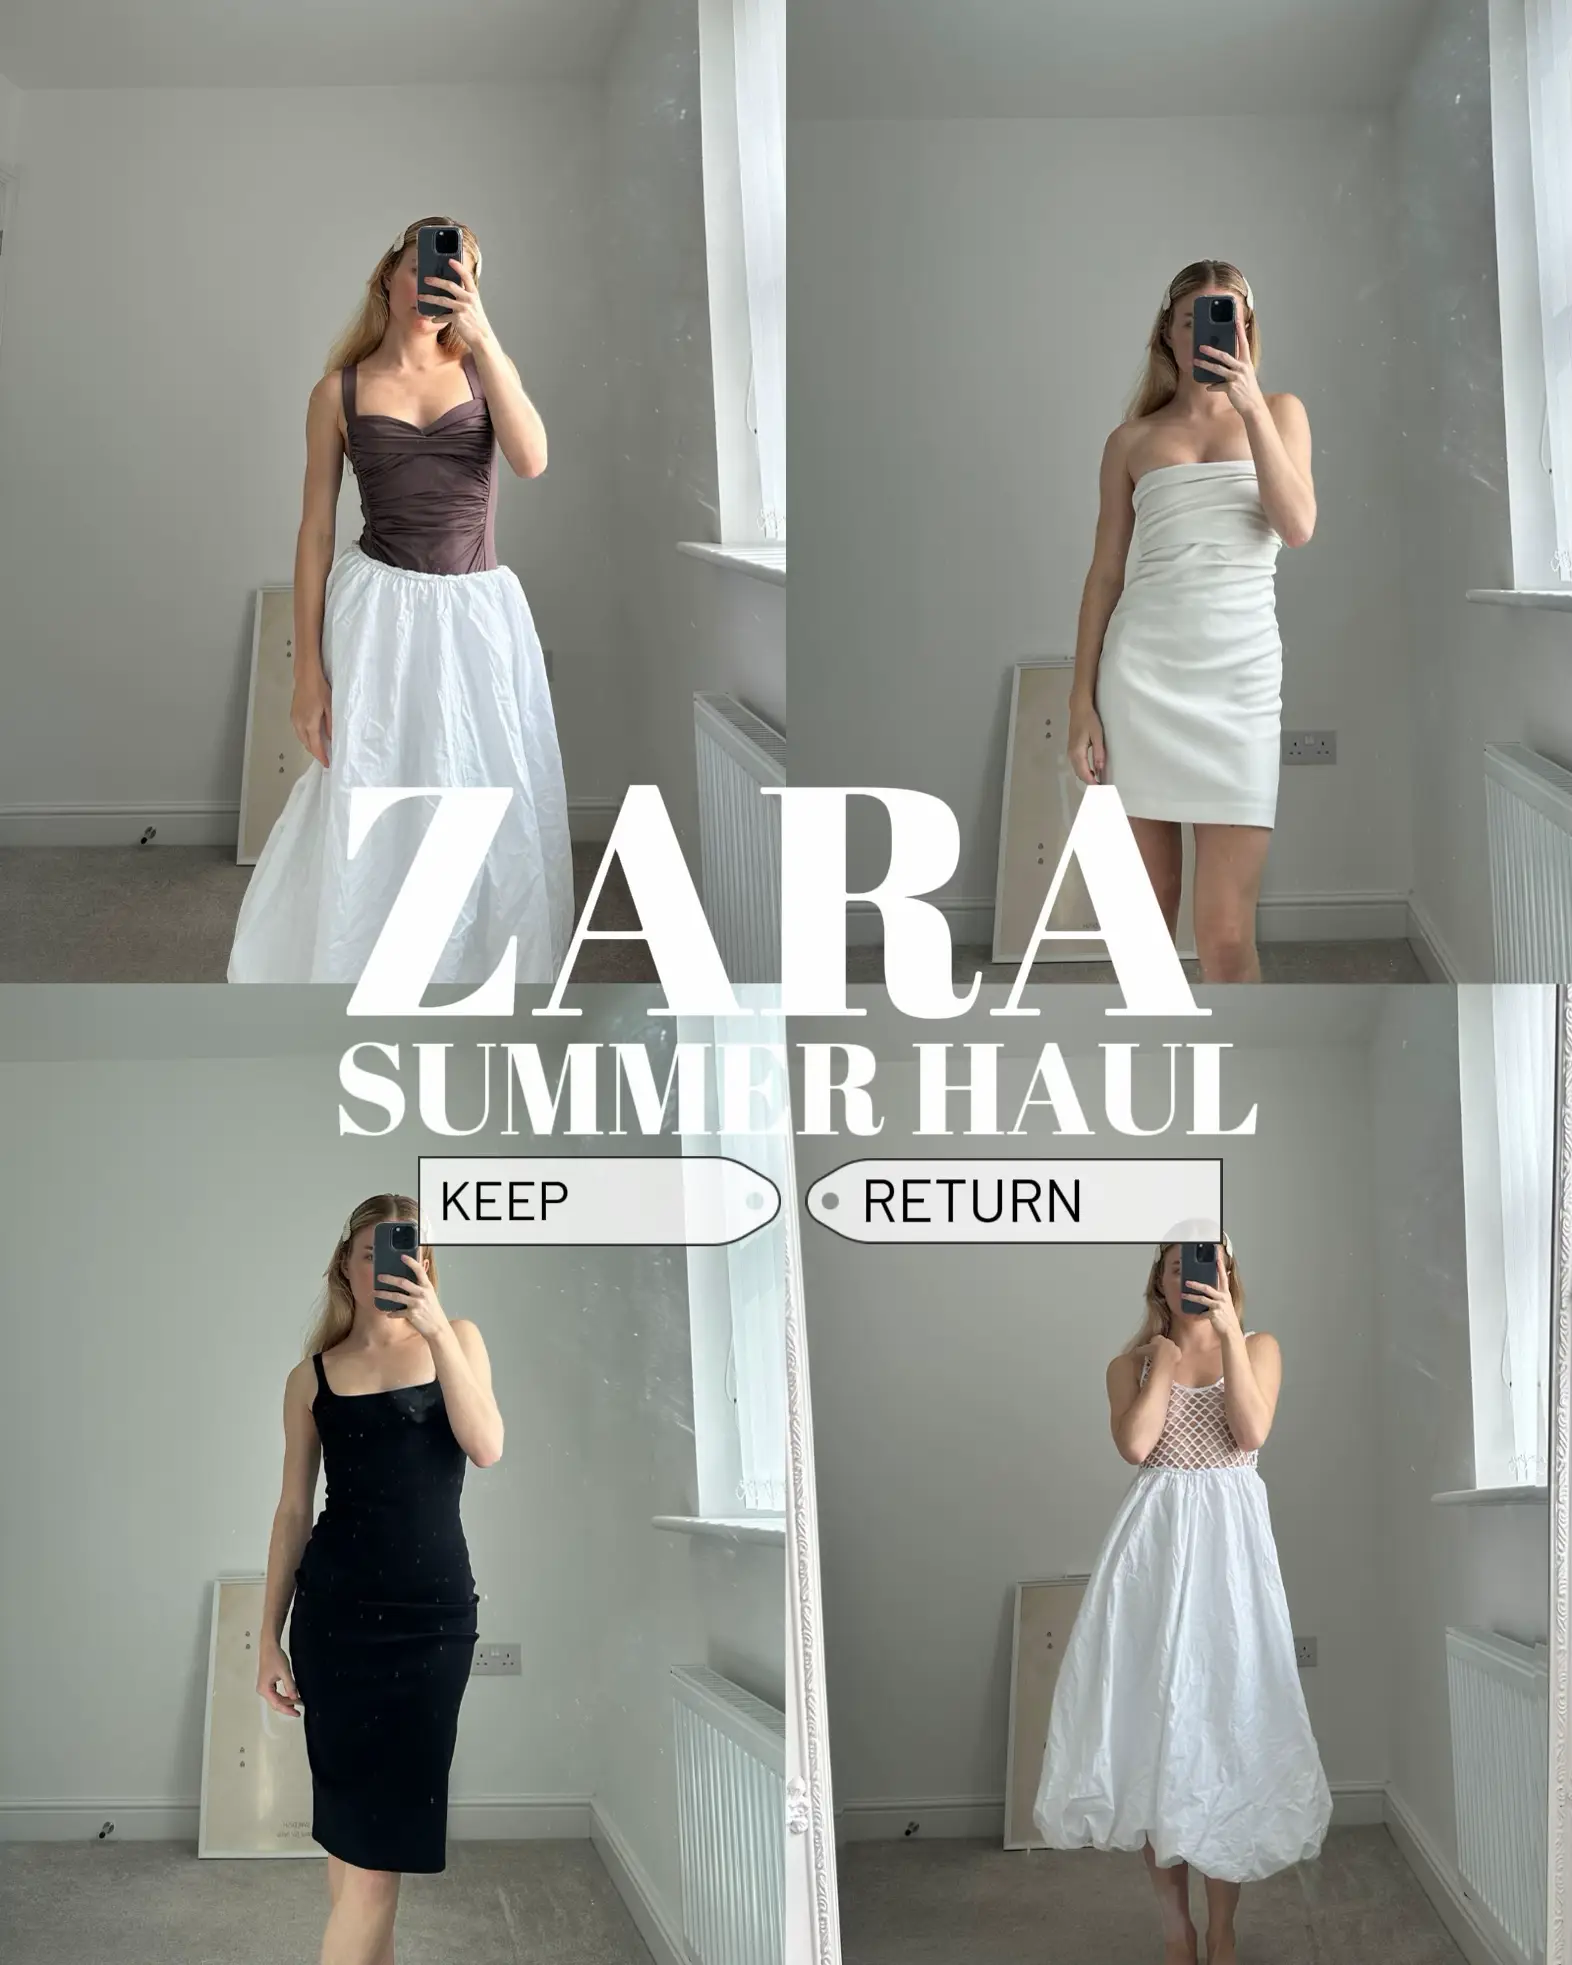 ZARA HAUL - KEEP OR RETURN, Gallery posted by mywhowhatwhere